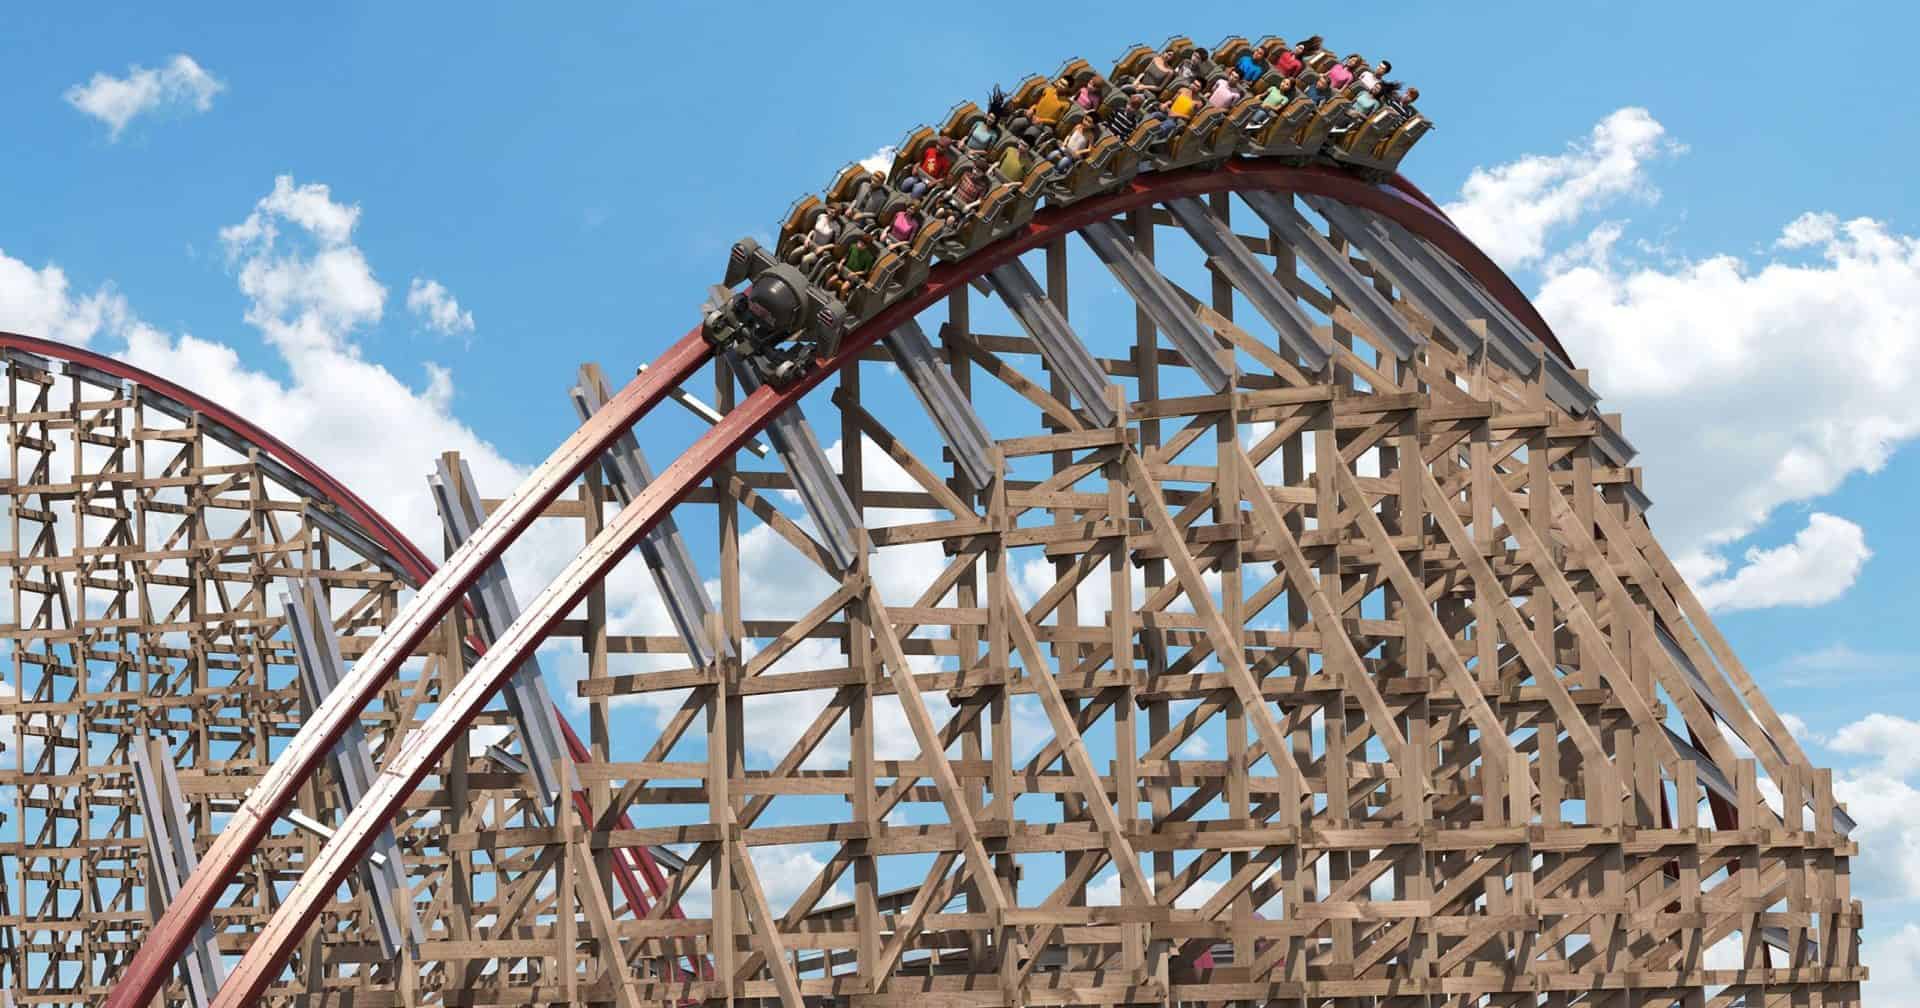 What are the top 3 biggest amusement parks?